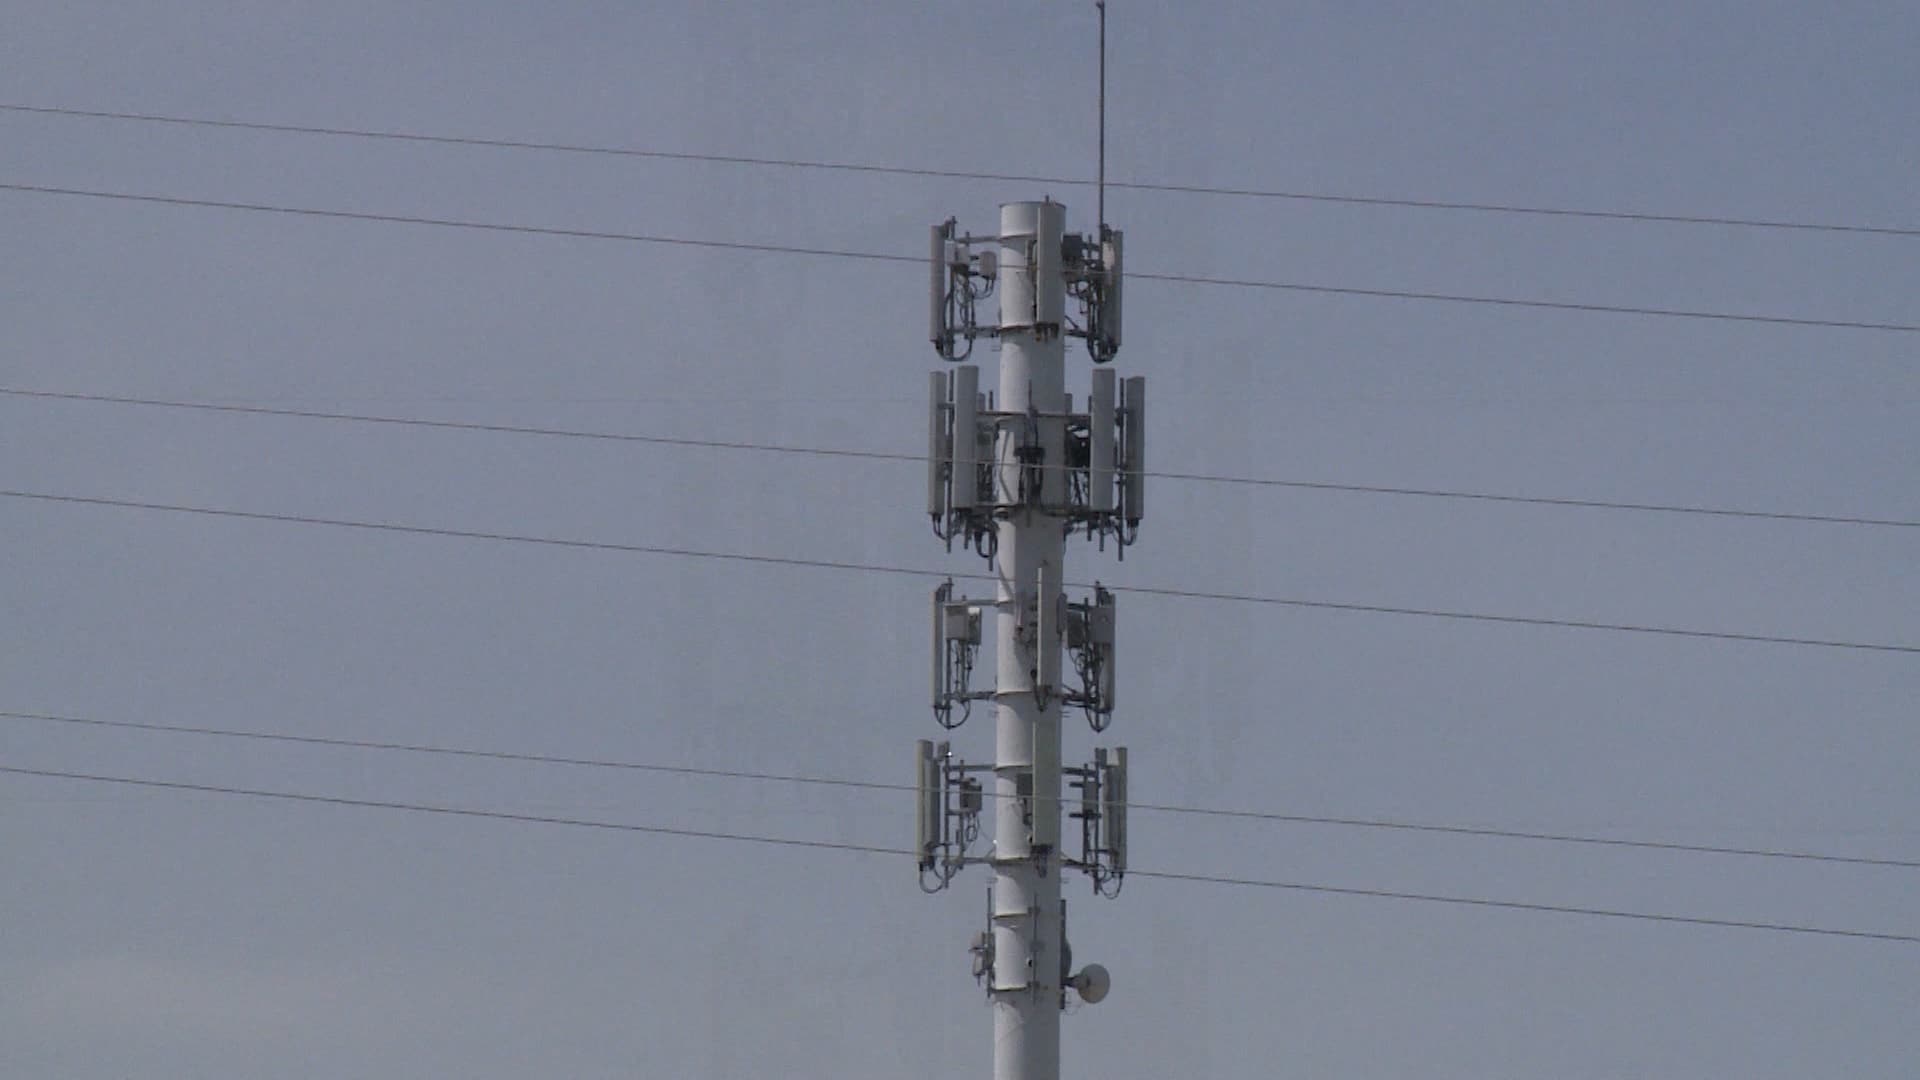 A cell tower with a lot of antennas on it.